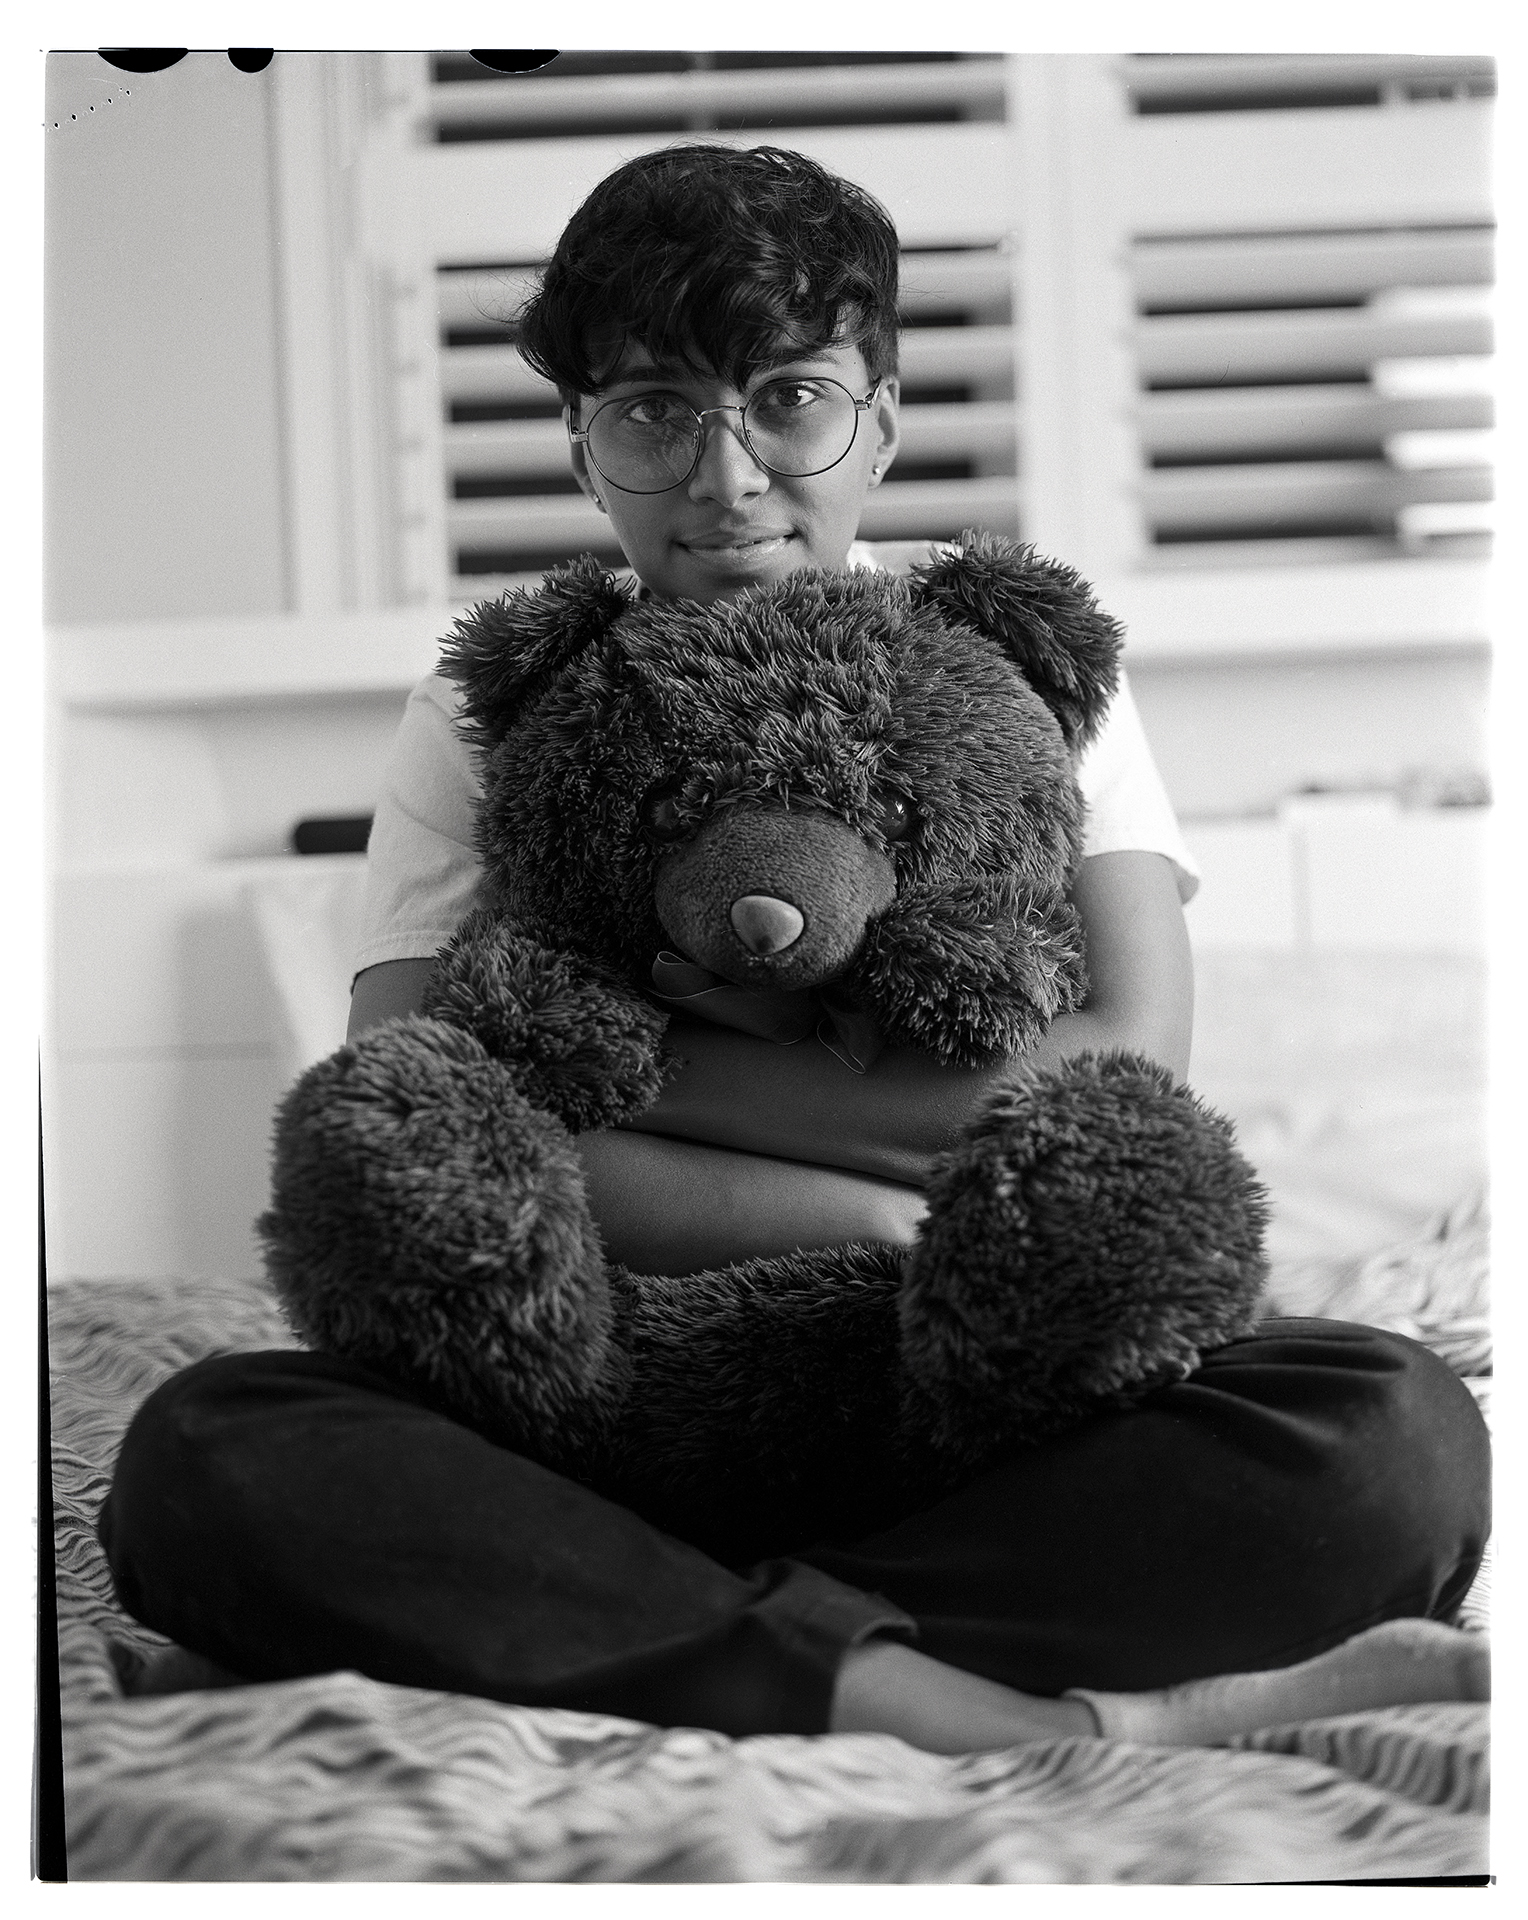 A black and white image of Shikha, a woman in her early 20’s with short wavy hair. Shikha is sitting on top of her bed holding a large dark teddy bear. Her head is resting on top of the bear while her arms hug it from behind. She is wearing dark pants and a white t-shirt.